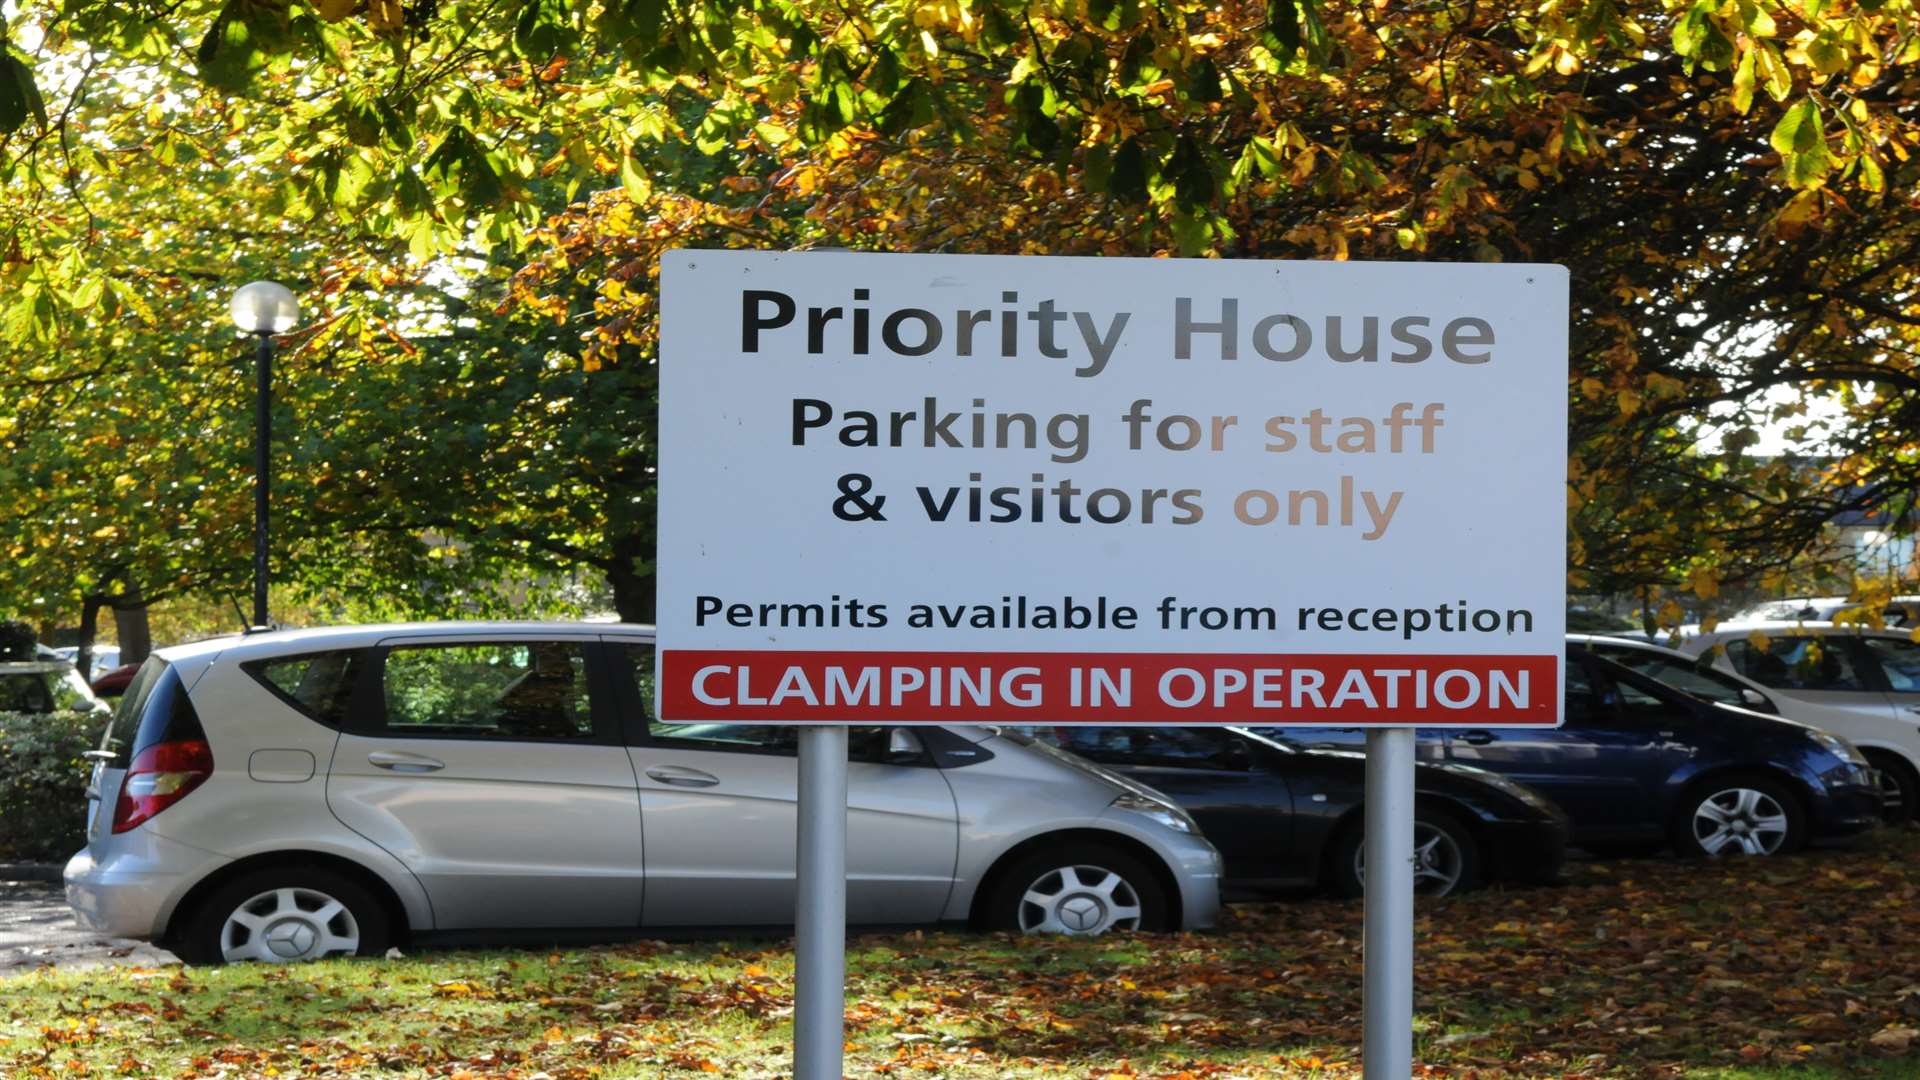 Priority House at Maidstone Hospital